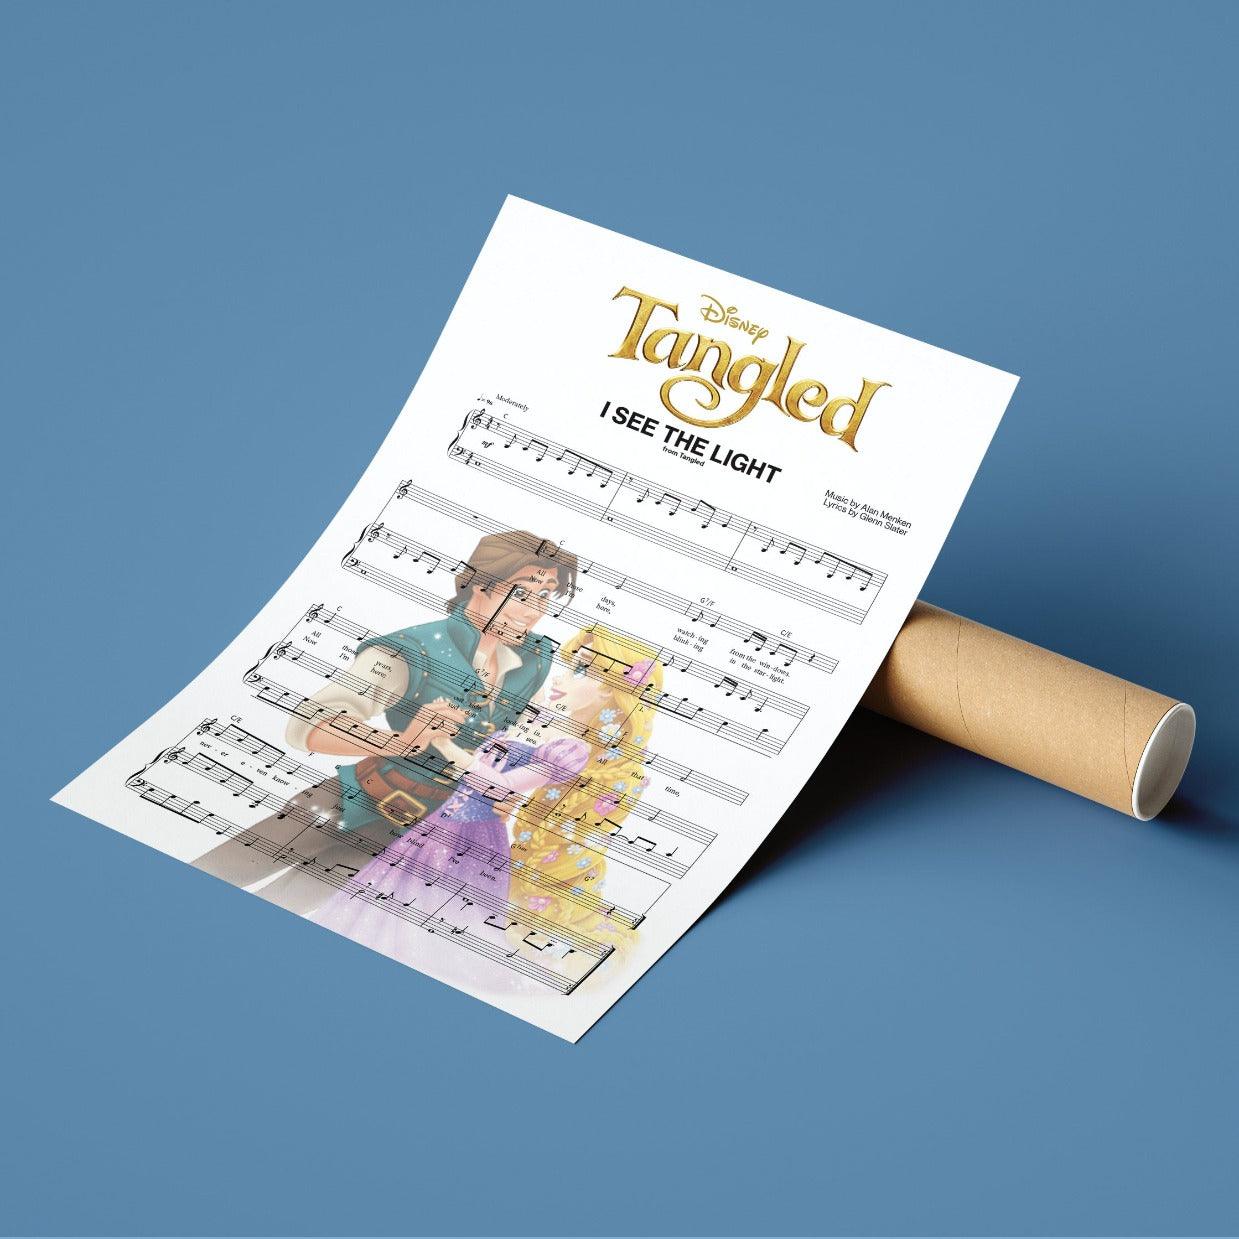 Tangled(Disney) - I See the Light Song Music Sheet Notes Print Everyone has a favorite Song lyric prints and with Tangled now you can show the score as printed staff. The personal favorite song lyrics art shows the song chosen as the score.